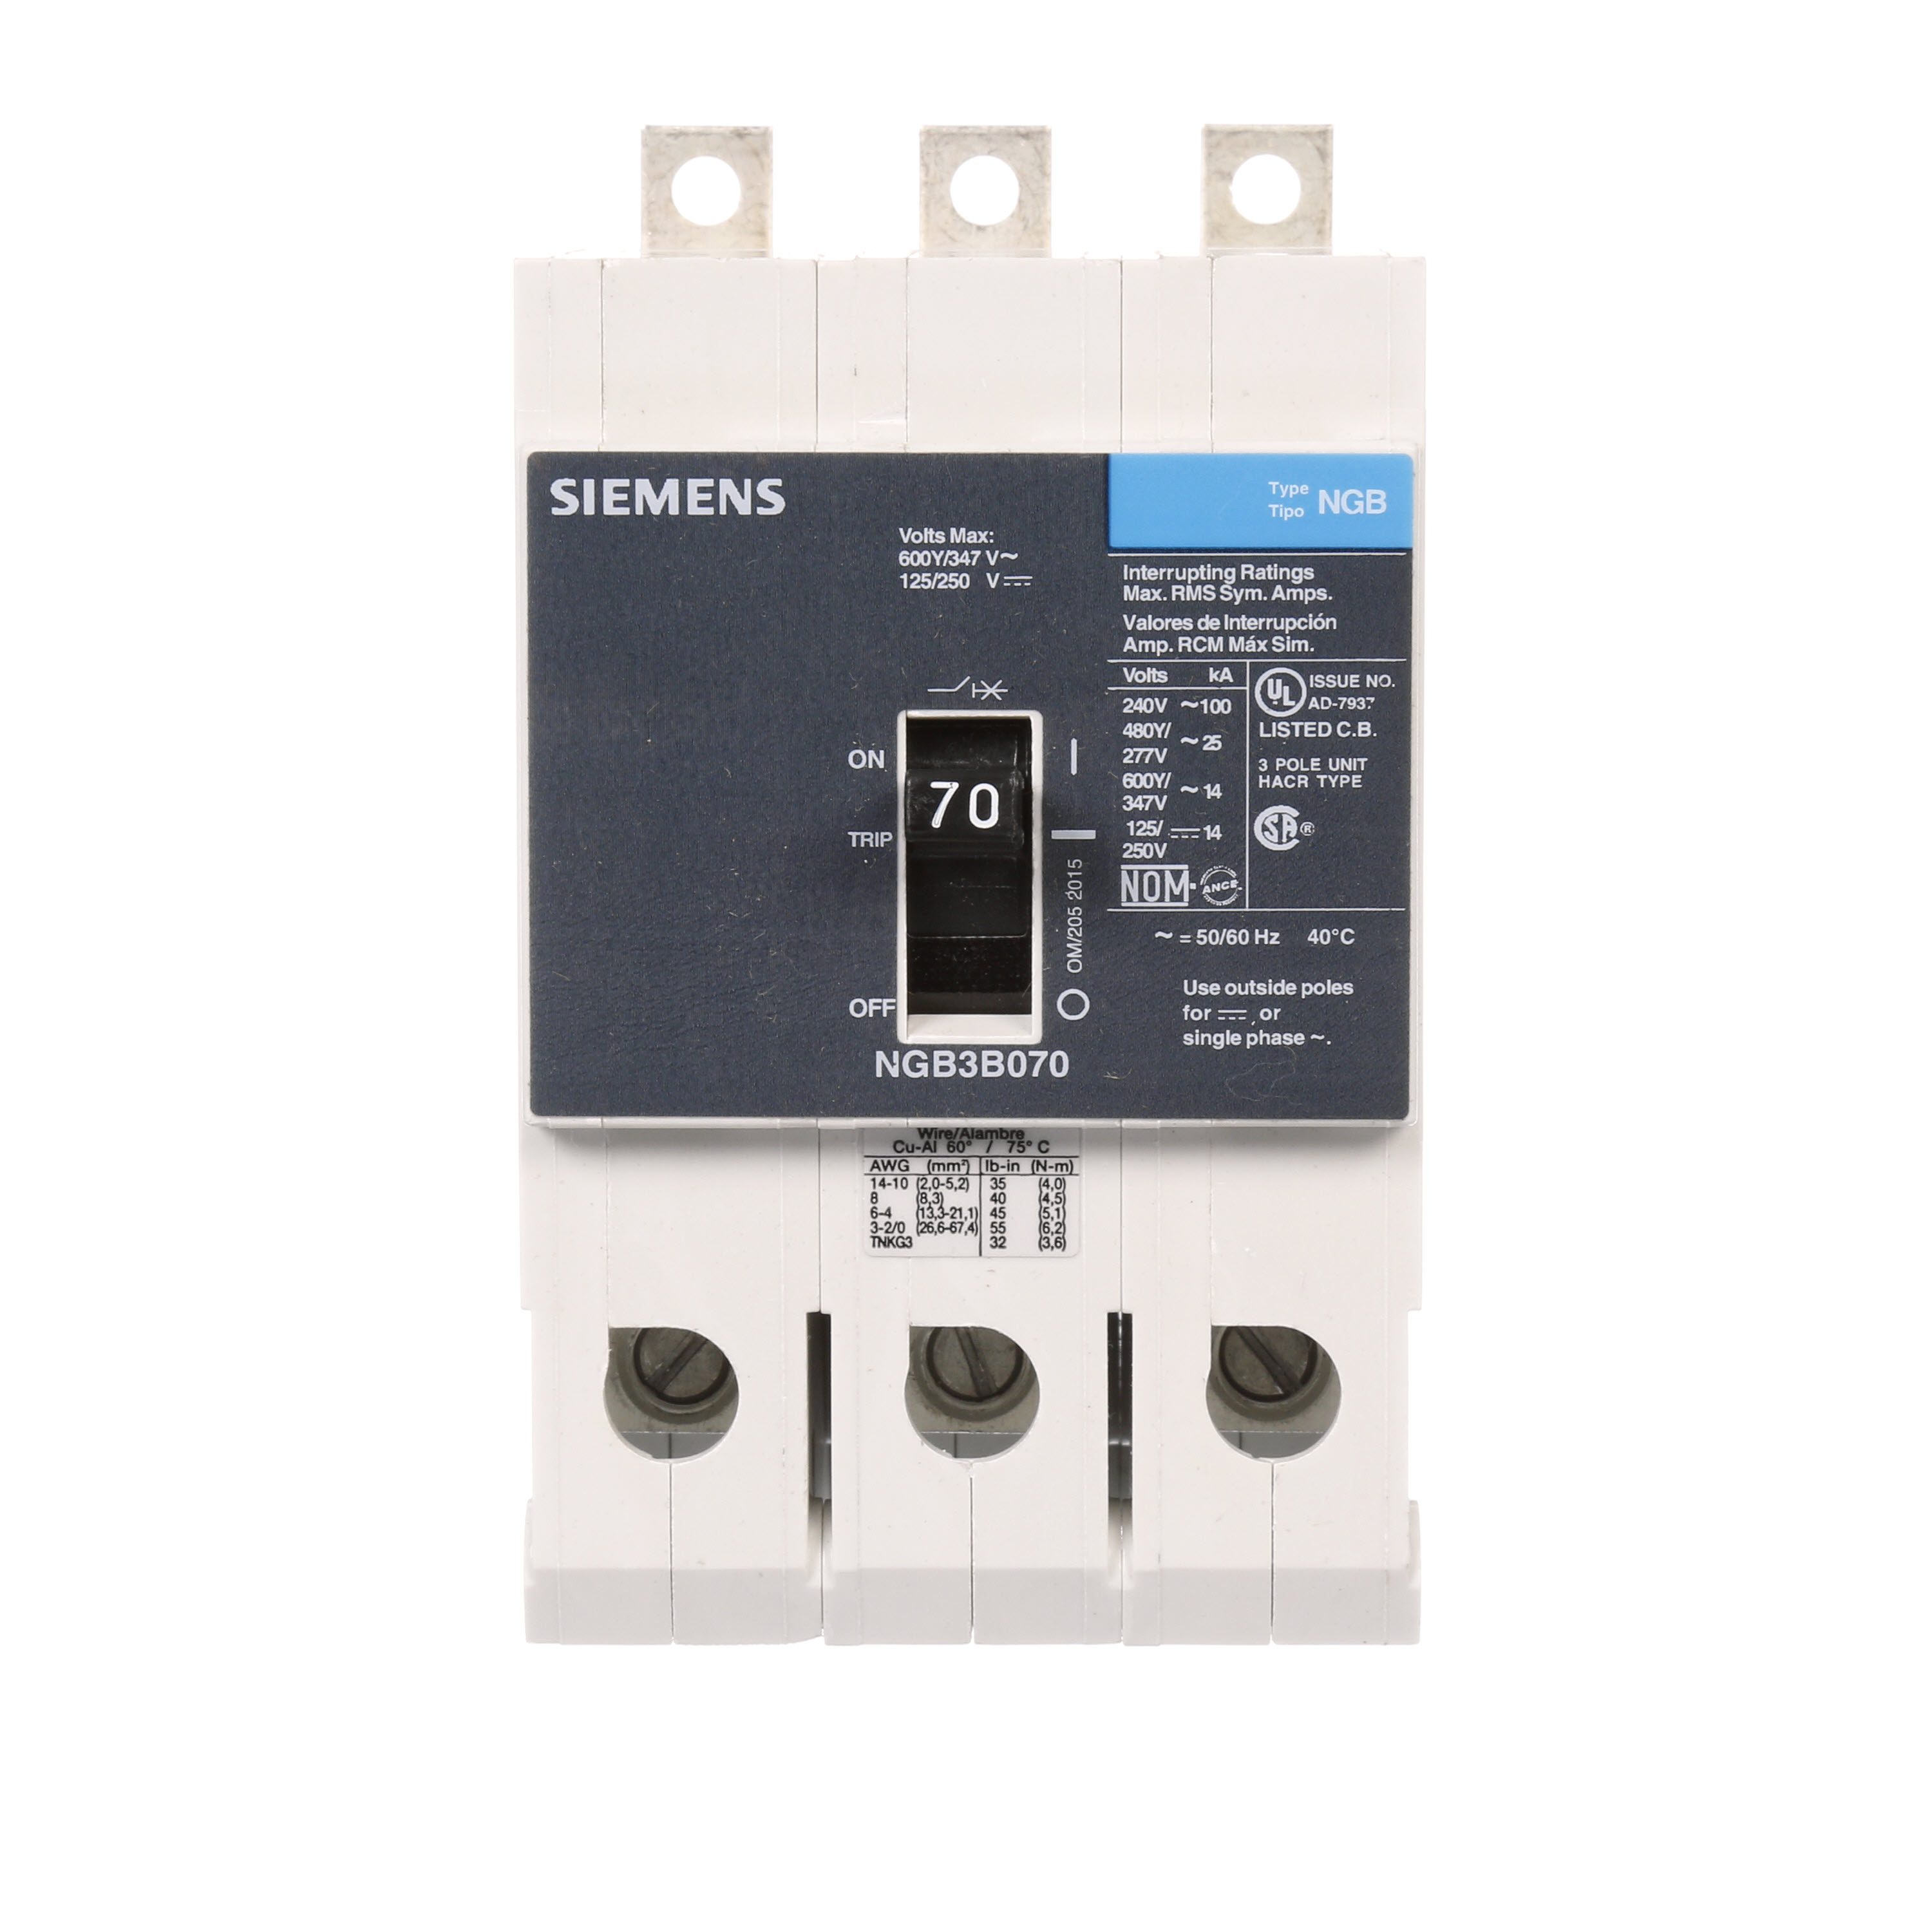 SIEMENS LOW VOLTAGE PANELBOARD MOUNT G FRAME CIRCUIT BREAKER WITH THERMAL - MAGNETIC TRIP. UL LISTED NGB FRAME WITH STANDARD BREAKING CAPACITY. 70A 3-POLE (14KAIC AT 600Y/347V) (25KAIC AT 480Y/277V). SPECIAL FEATURES MOUNTS ON PANELBOARD, LOAD SIDE LUGS ONLY (TC1GG20) WIRE RANGE 8 - 1/0 AWS (CU/AL). DIMENSIONS (W x H x D) IN 3 x 5.4 x 2.8.